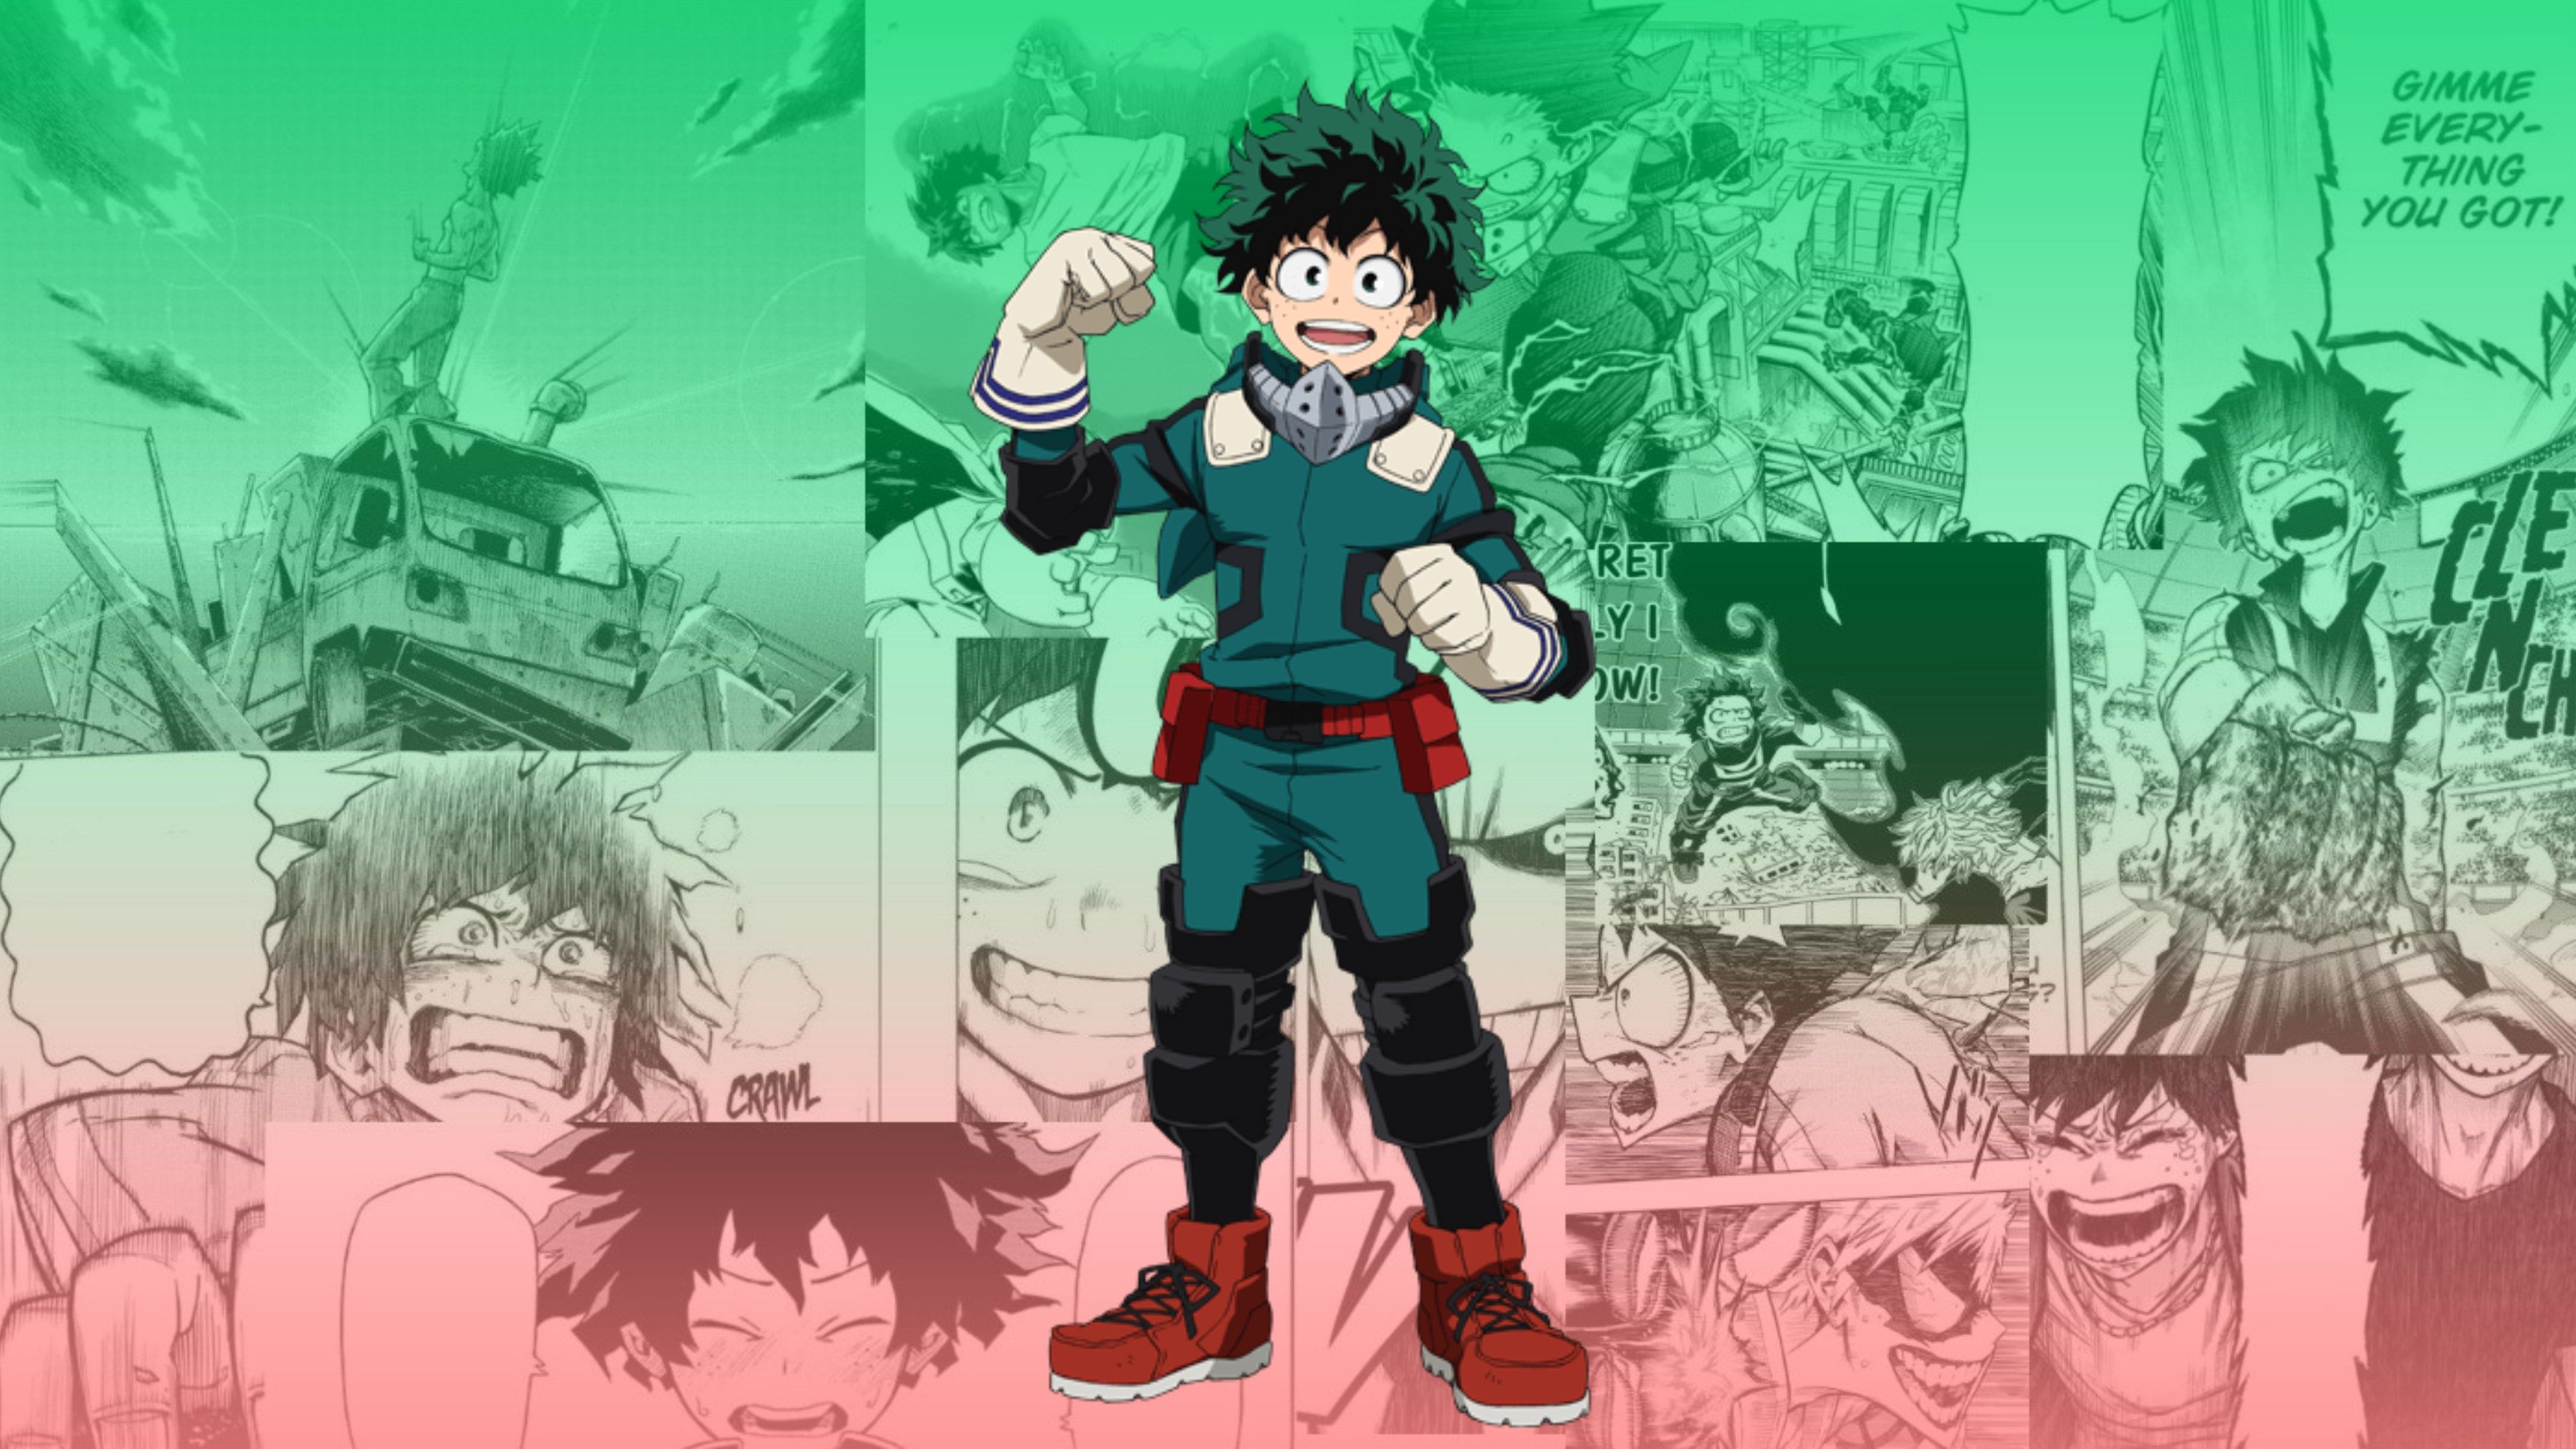 I'll Do My Best! Highly Requested And Highly Precious, Deku 4K Wallpaper! (Commissioned By U MightyMackinac)